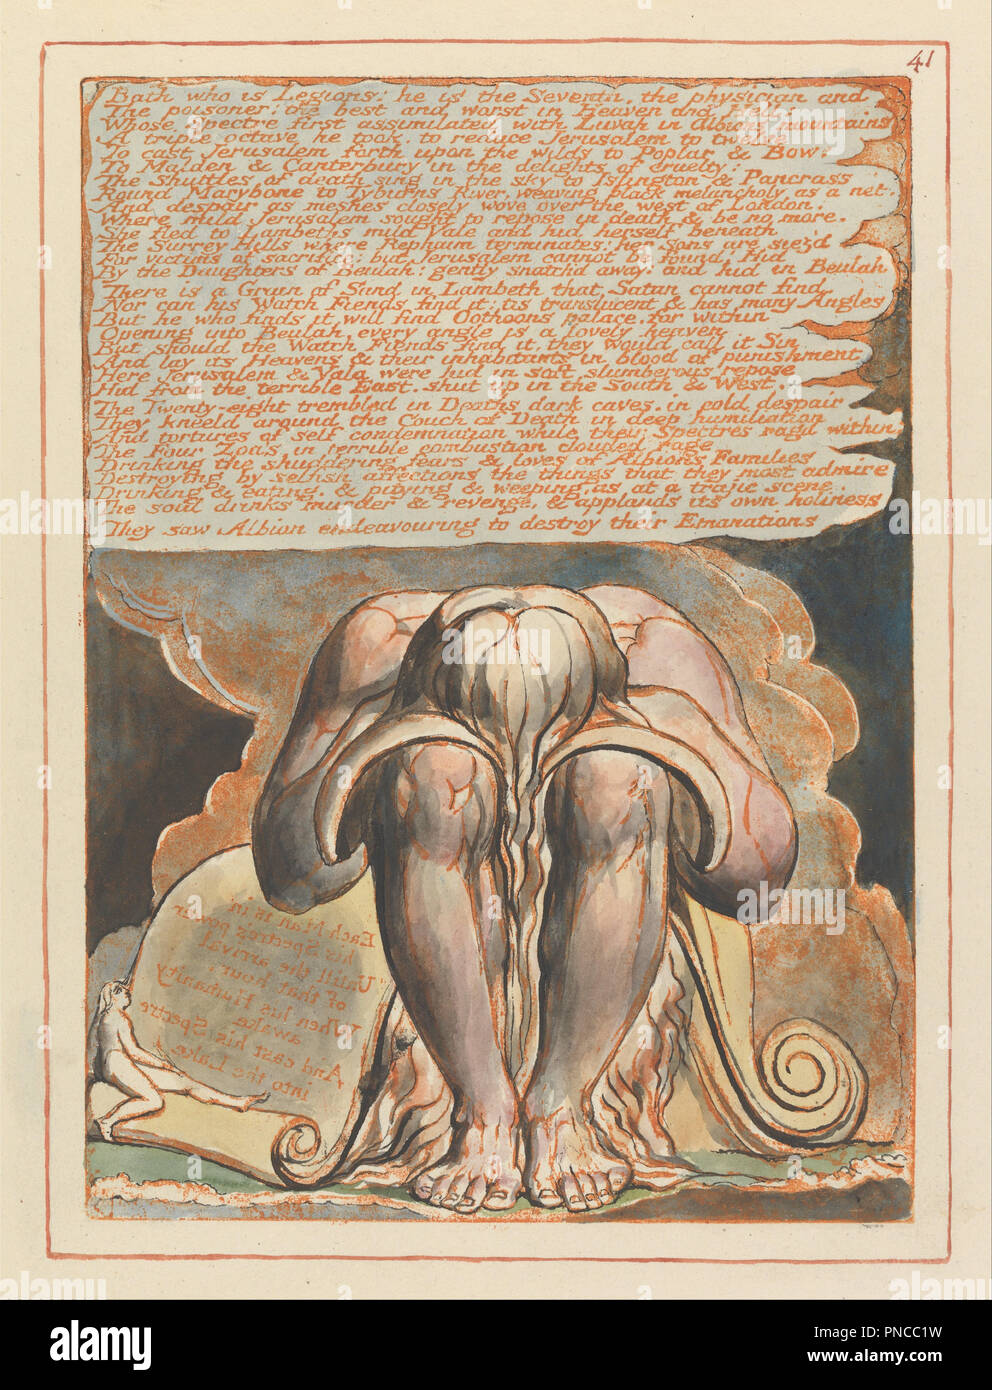 Jerusalem, Plate 41, 'Bath who is Legions....'. Date/Period: 1804 to 1820. Print. Orange print, pen, black ink and watercolor on cream-colored paper (Relief etching printed in orange with pen and black ink and watercolor on moderately thick, smooth, cream wove paper). Height: 225 mm (8.85 in); Width: 162 mm (6.37 in). Author: William Blake. Stock Photo